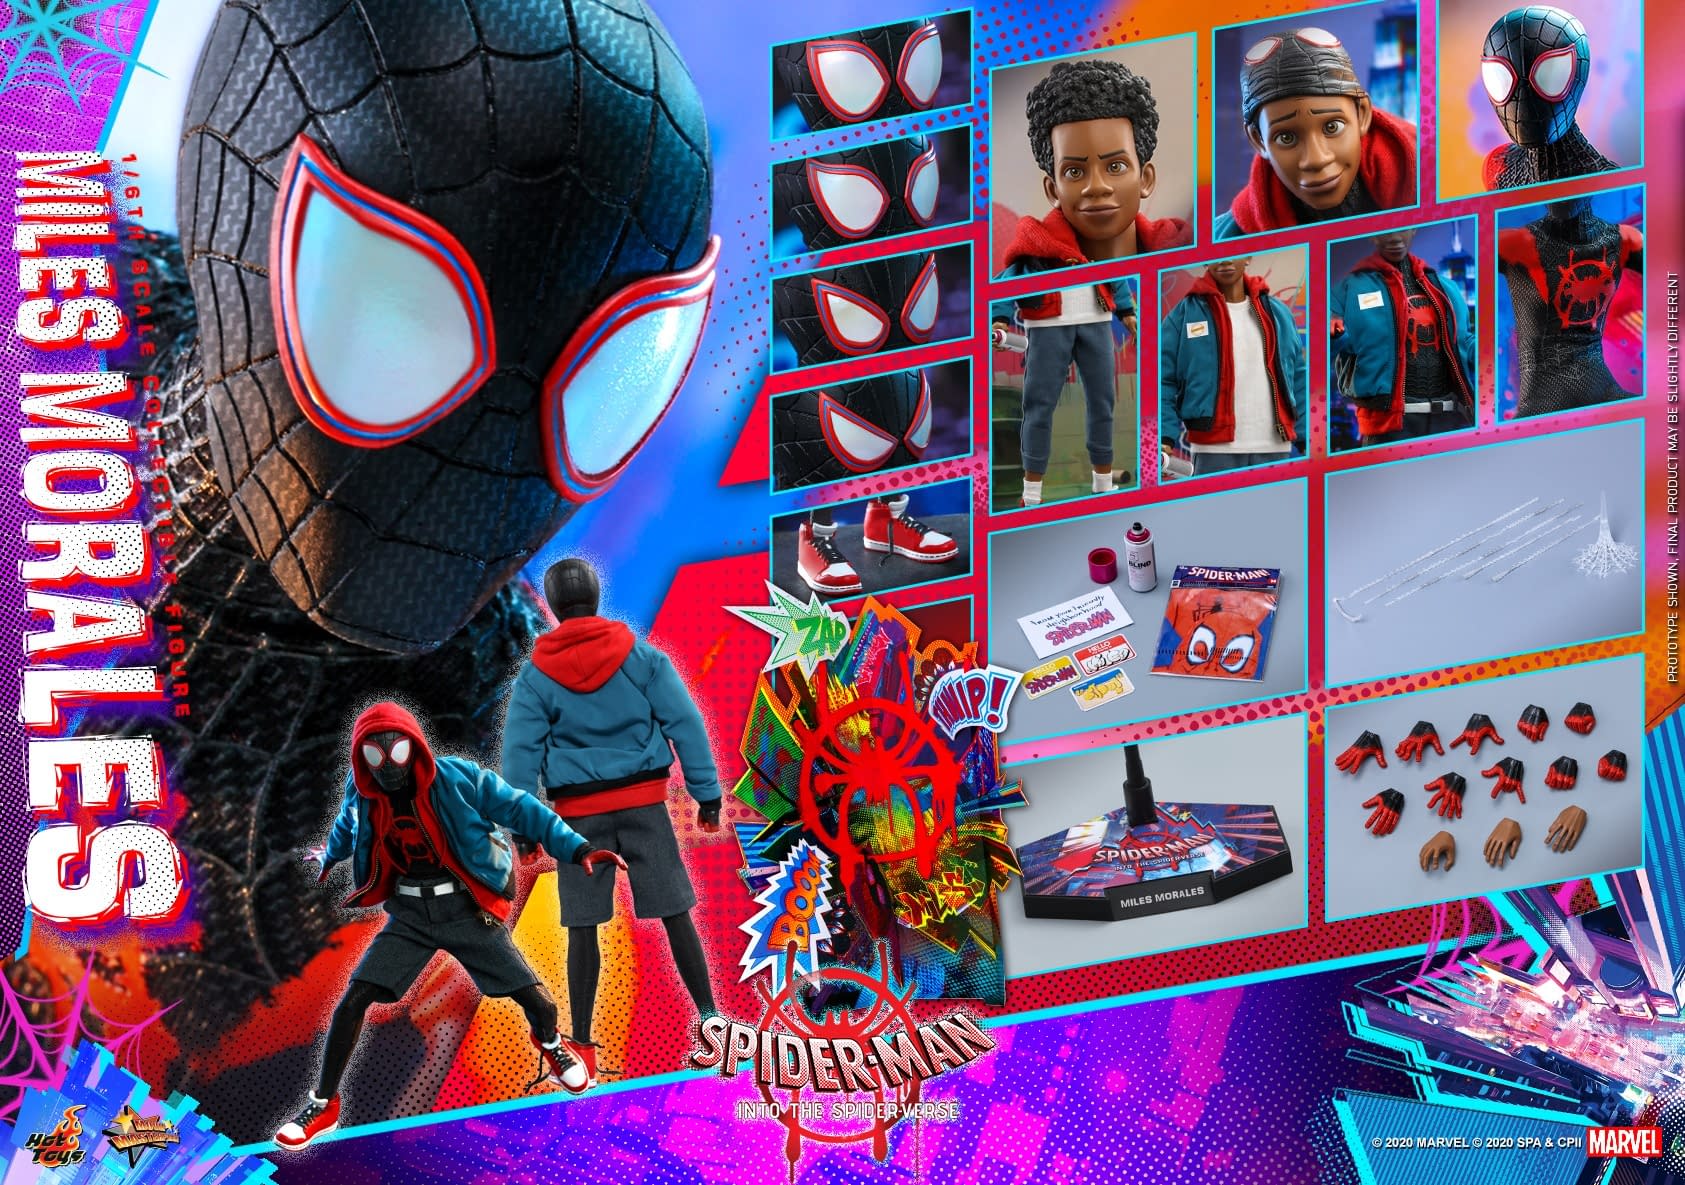 Spider-Man Miles Morales Hits the Streets with New Hot Toys Figure